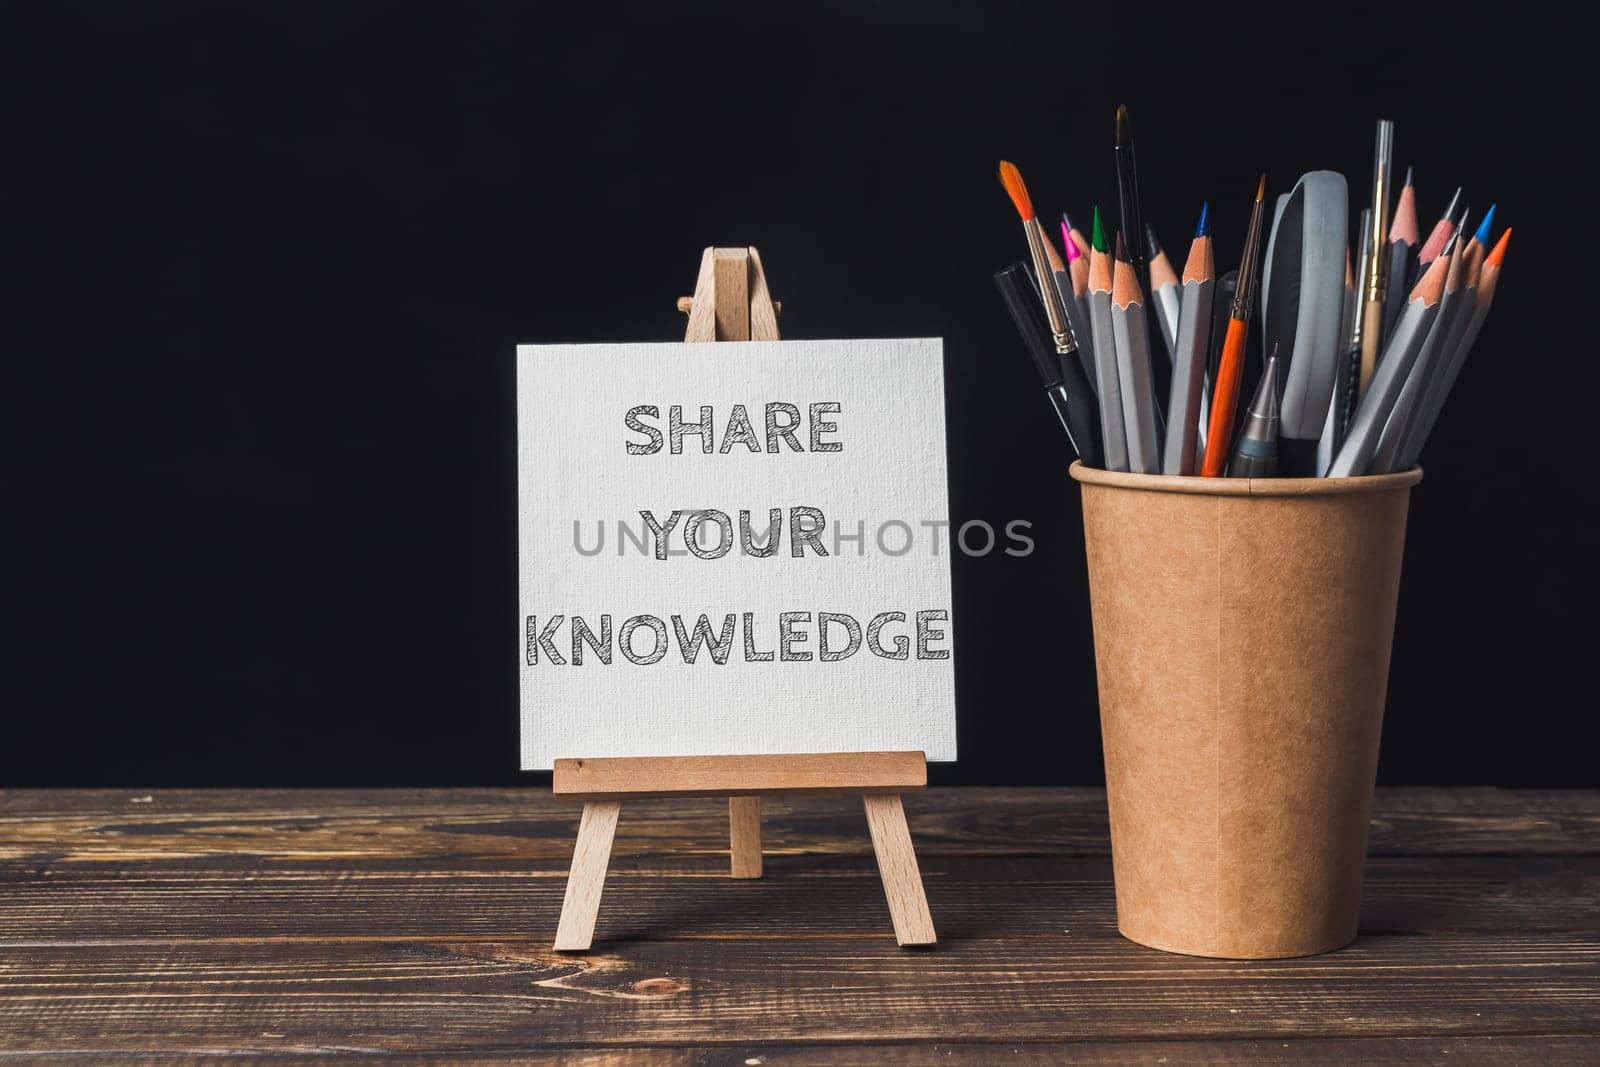 A white sign that says share your knowledge is on a wooden stand. A cup of pencils is next to the sign